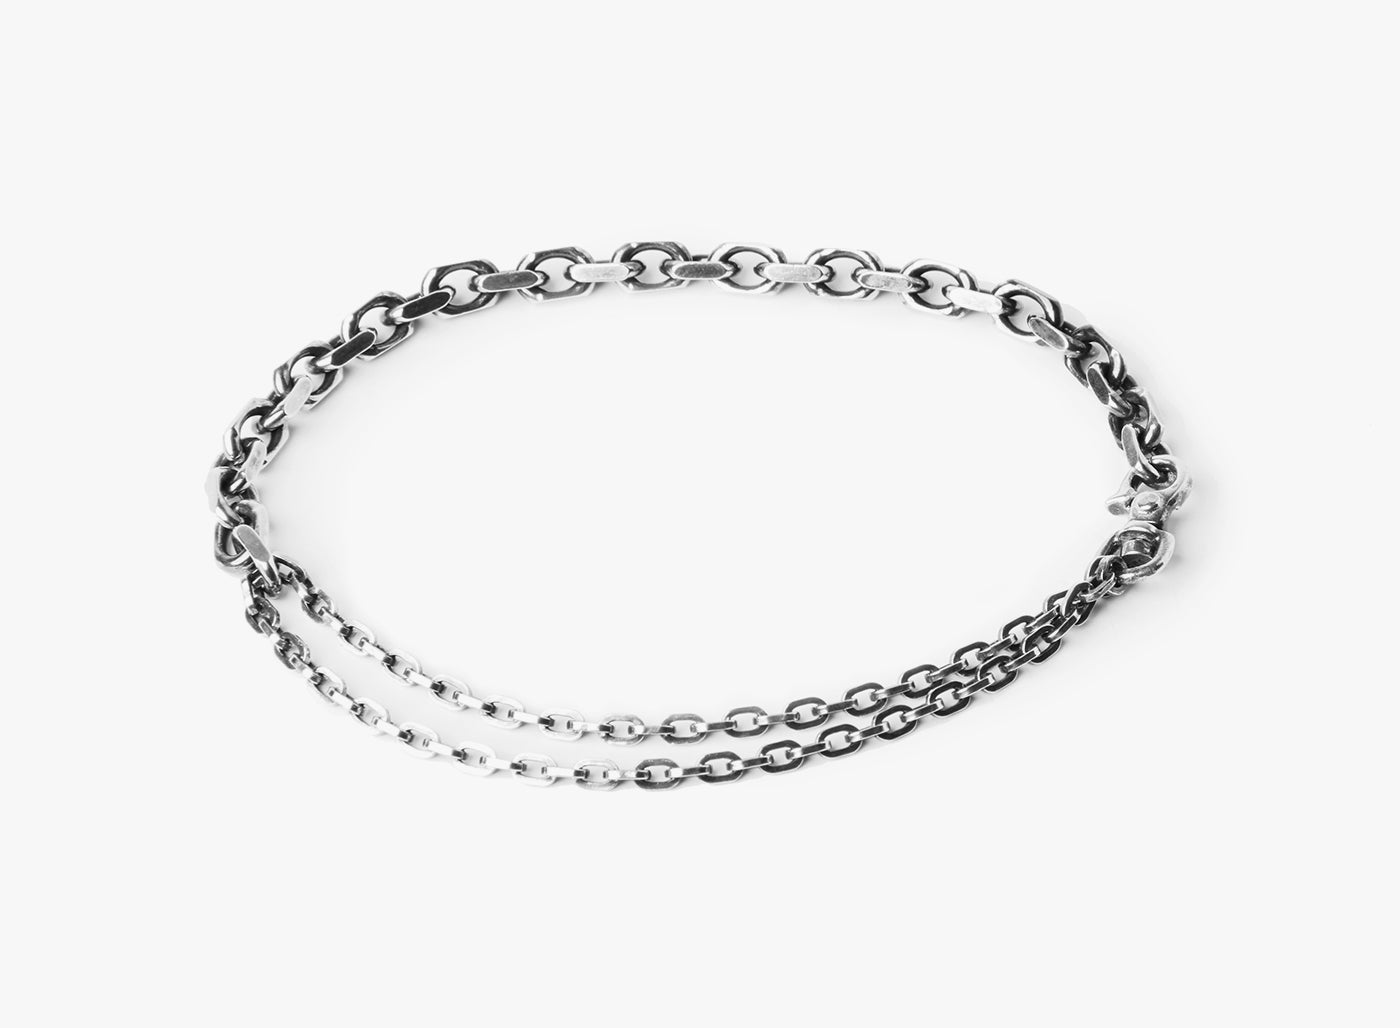 MIXED CHAIN BRACELET 211: a drawn cable chain connects to a double wrap flat cable and is fastened by a carabiner lobster clasp.